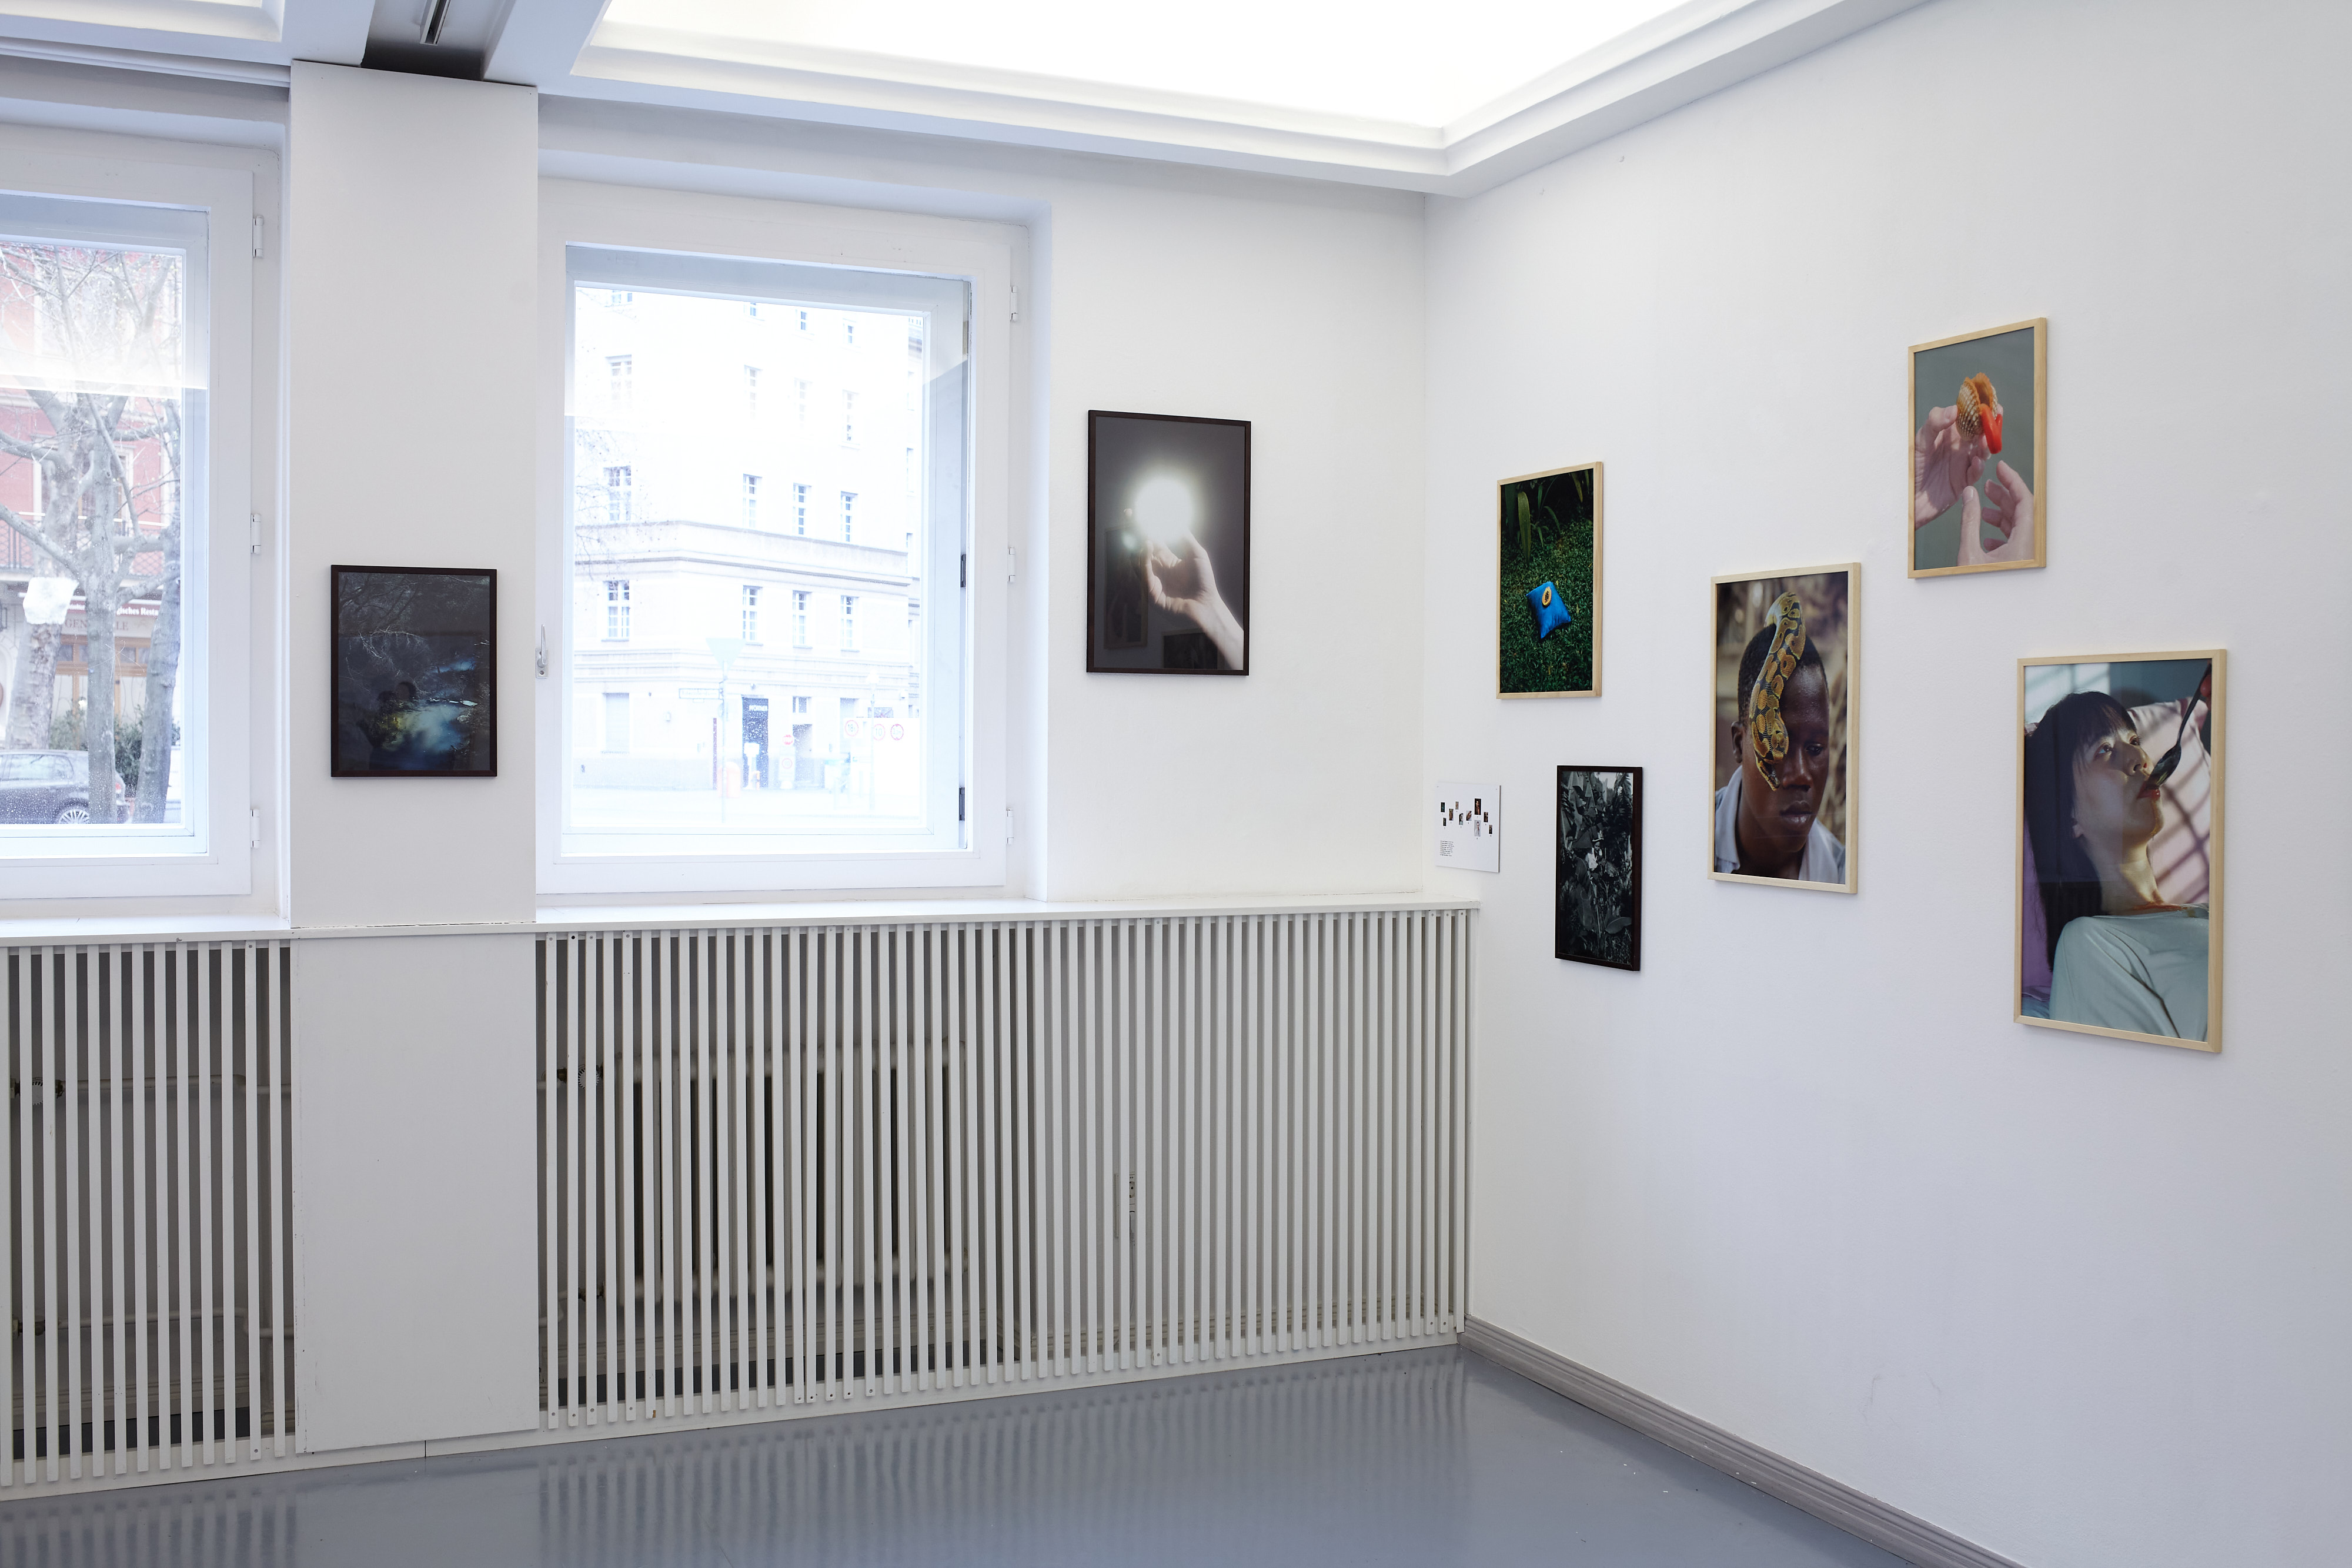 Installation view of the PEP (Photographic Exploration Project) New Talents 2021 Exhibition at Kommunale Galerie Berlin